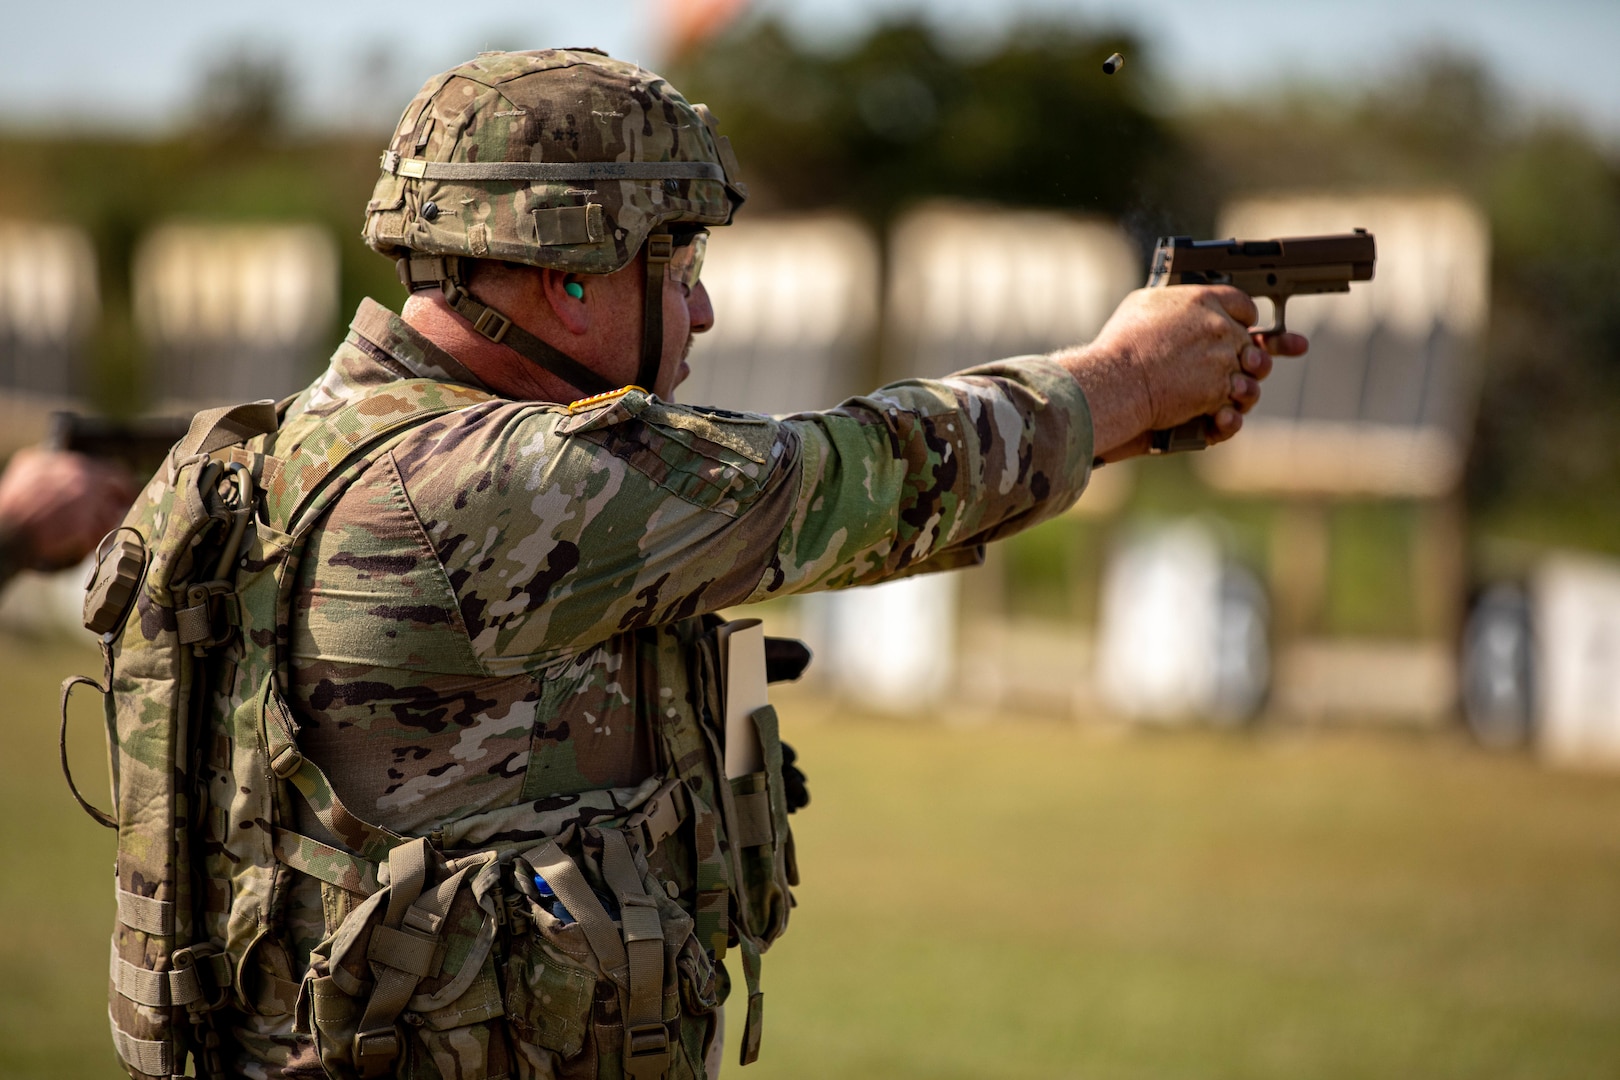 Sgt. Shawn Green, a Soldier with the 1st Squadron, 180th Cavalry Regiment, 45th Infantry Brigade Combat Team, Oklahoma Army National Guard, demonstrates his marksmanship during the Sergeant Major’s Match and Governor’s Twenty Marksmanship Competition with his M17 pistol at Camp Gruber Training Center, Oklahoma, Sept. 14, 2023. The Sergeant Major’s Match and Governor’s Twenty bring together Soldiers from across the state and test their weapons skills to earn the coveted Governor’s Twenty tab. (Oklahoma National Guard photo by Spc. Tyler Brahic).